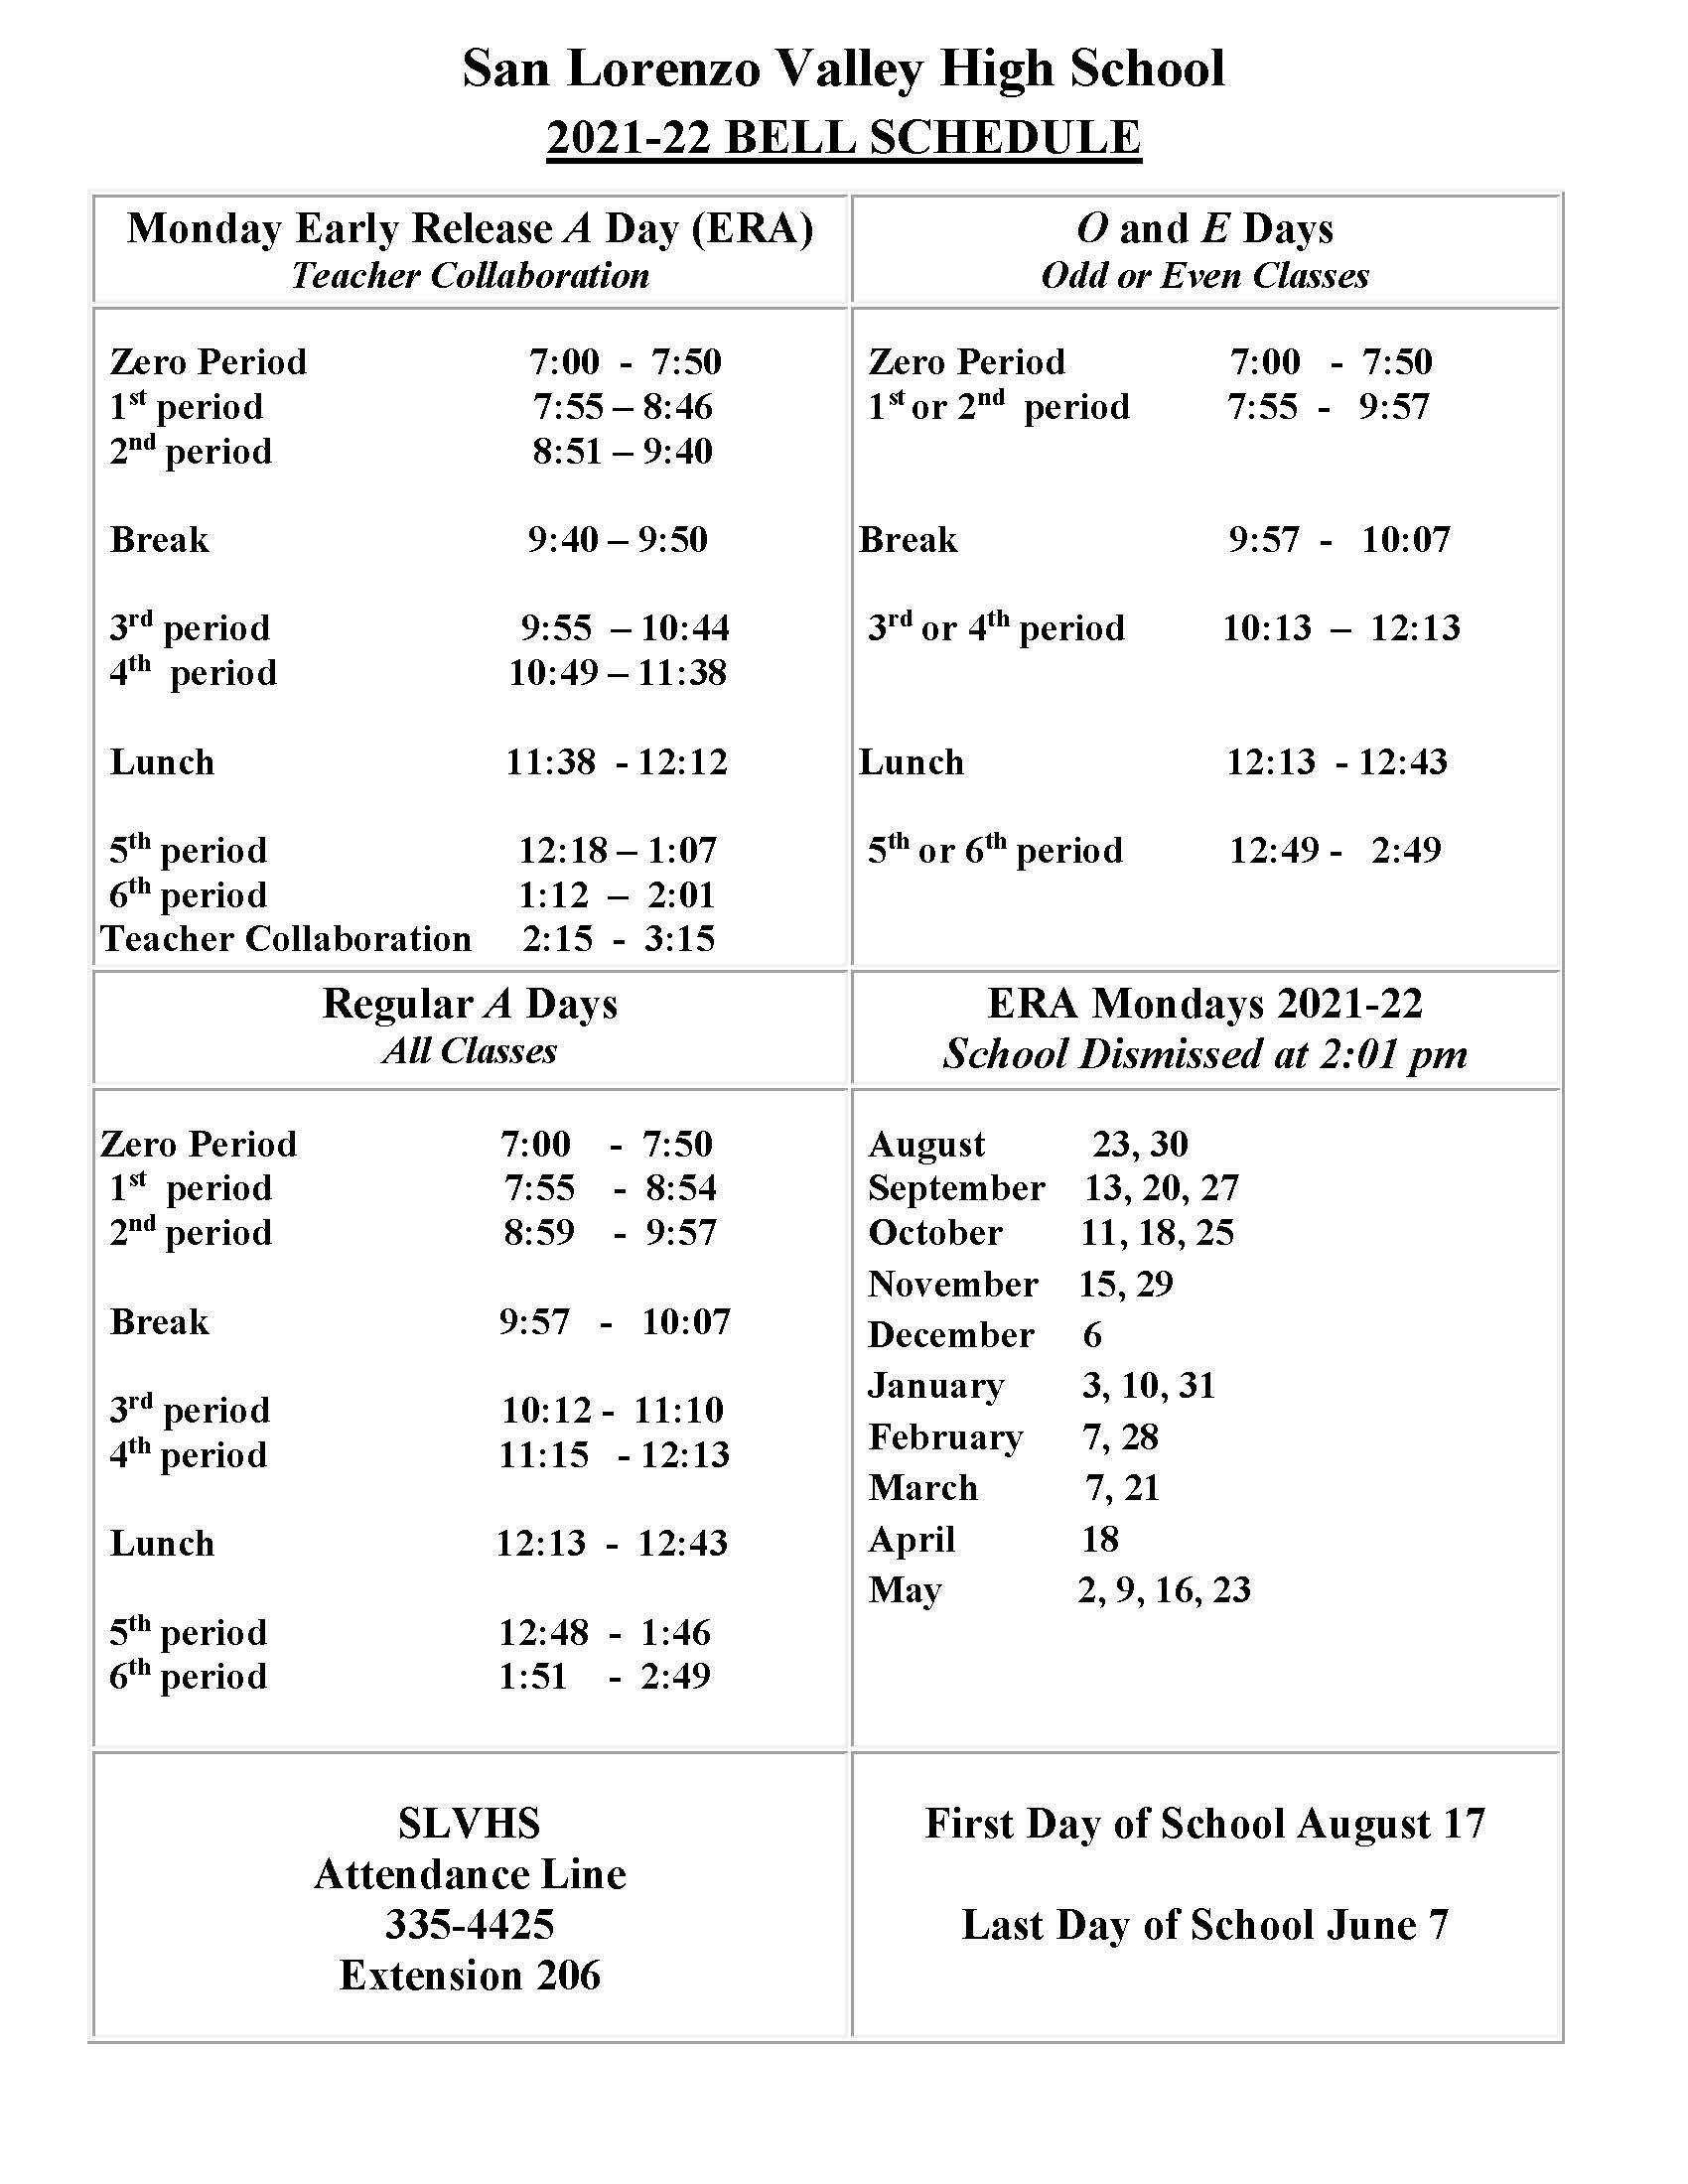 bell schedule; for details call 335-4425 x201